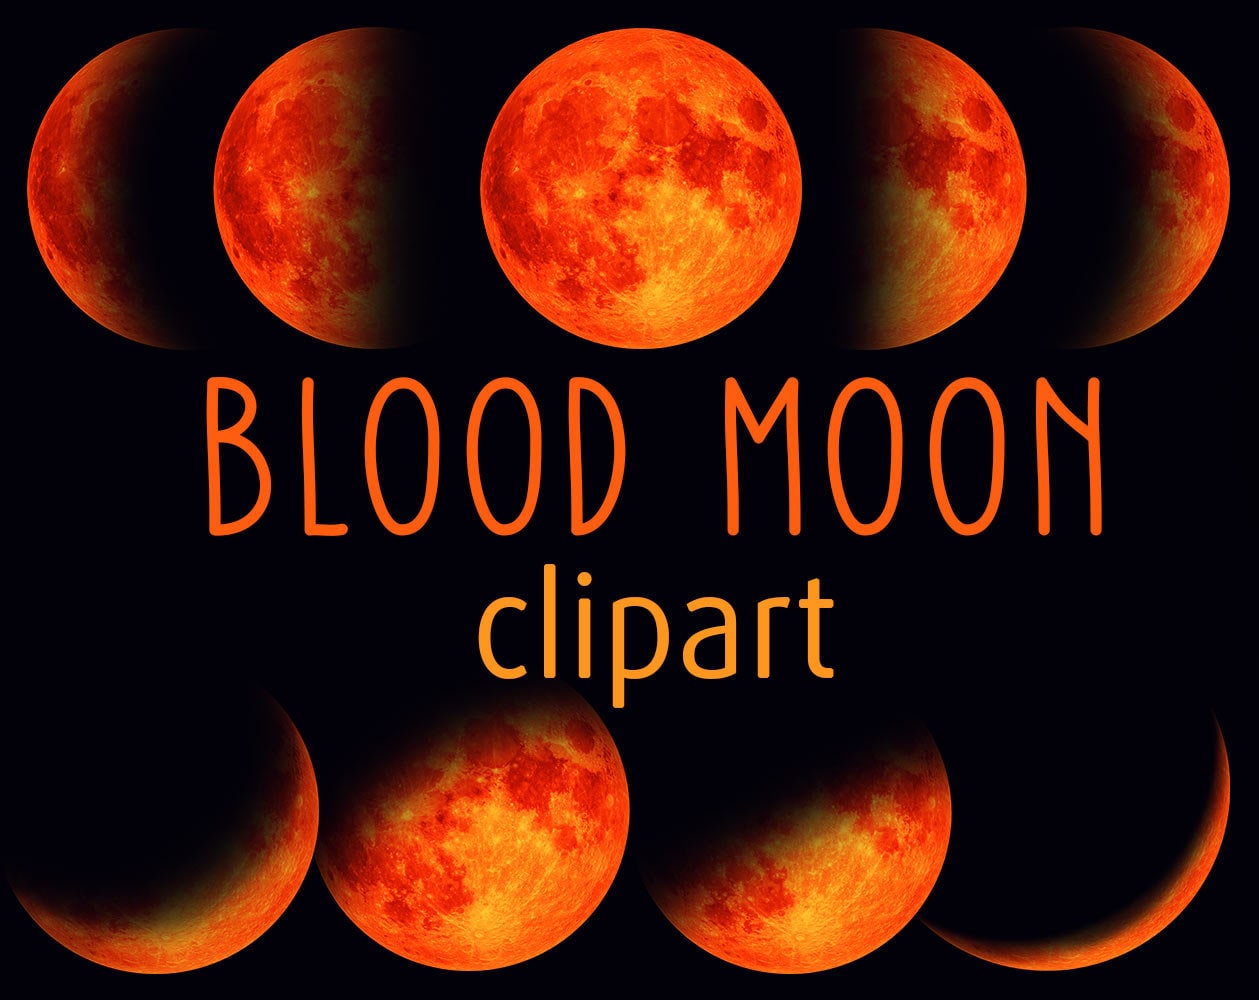 Free: Red Moon Png - Sphere Free PNG Images & Clipart Download